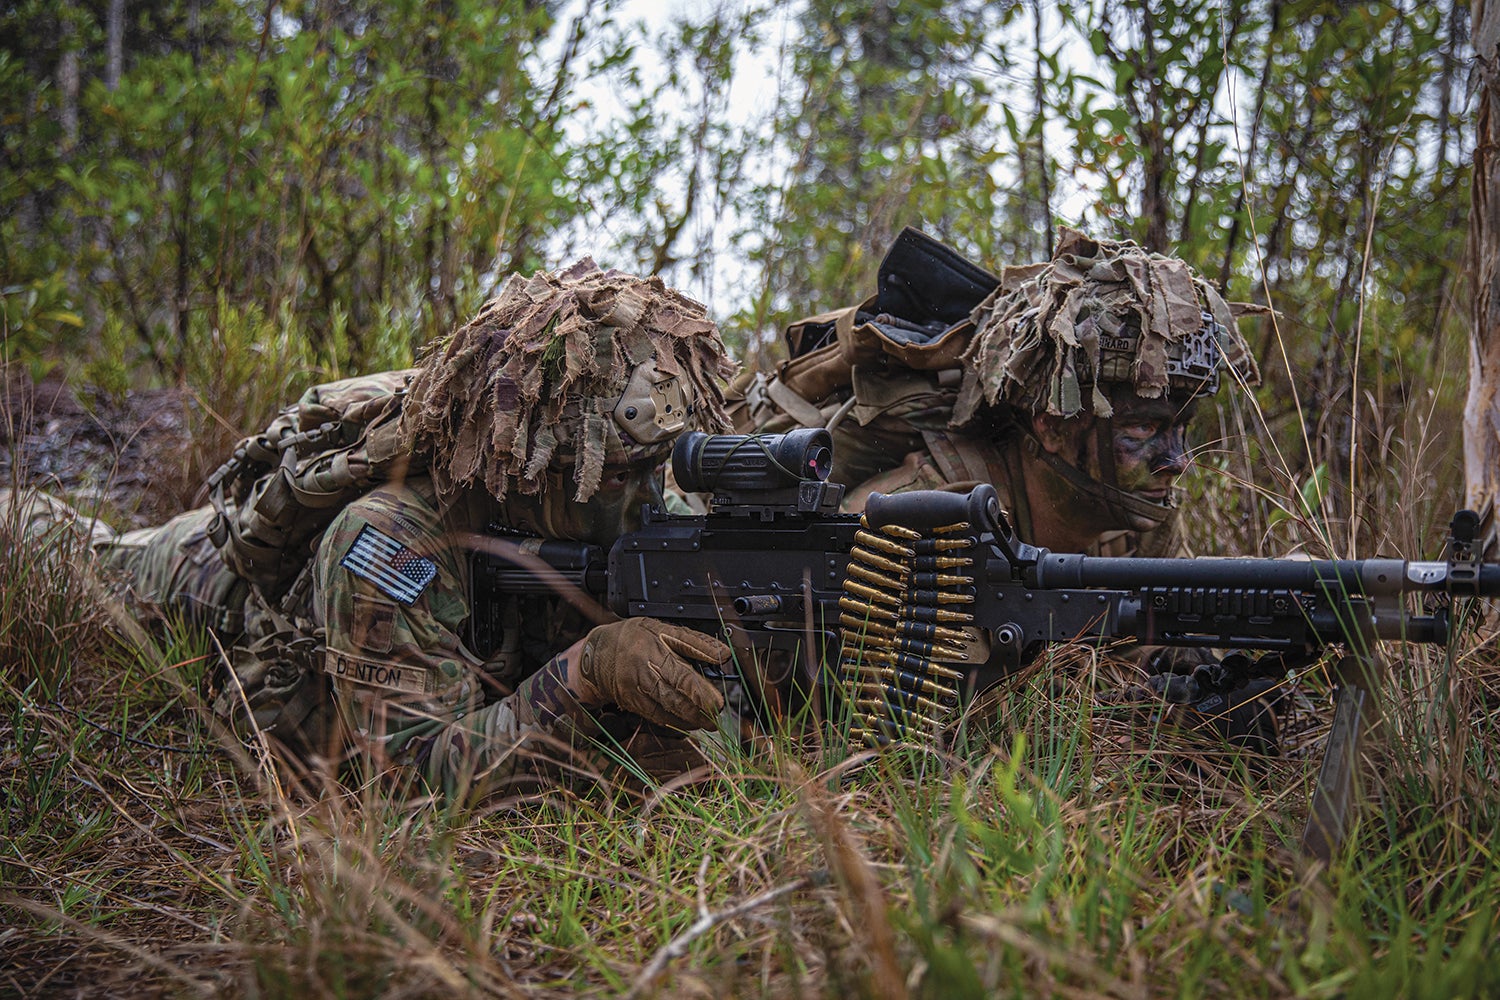 Paratroopers from the 2nd Brigade Combat Team, 82nd Airborne Division, train at the 25th Infantry Division’s Lightning Academy, Hawaii. (Credit: U.S. Army/Pfc. Mariah Aguilar)